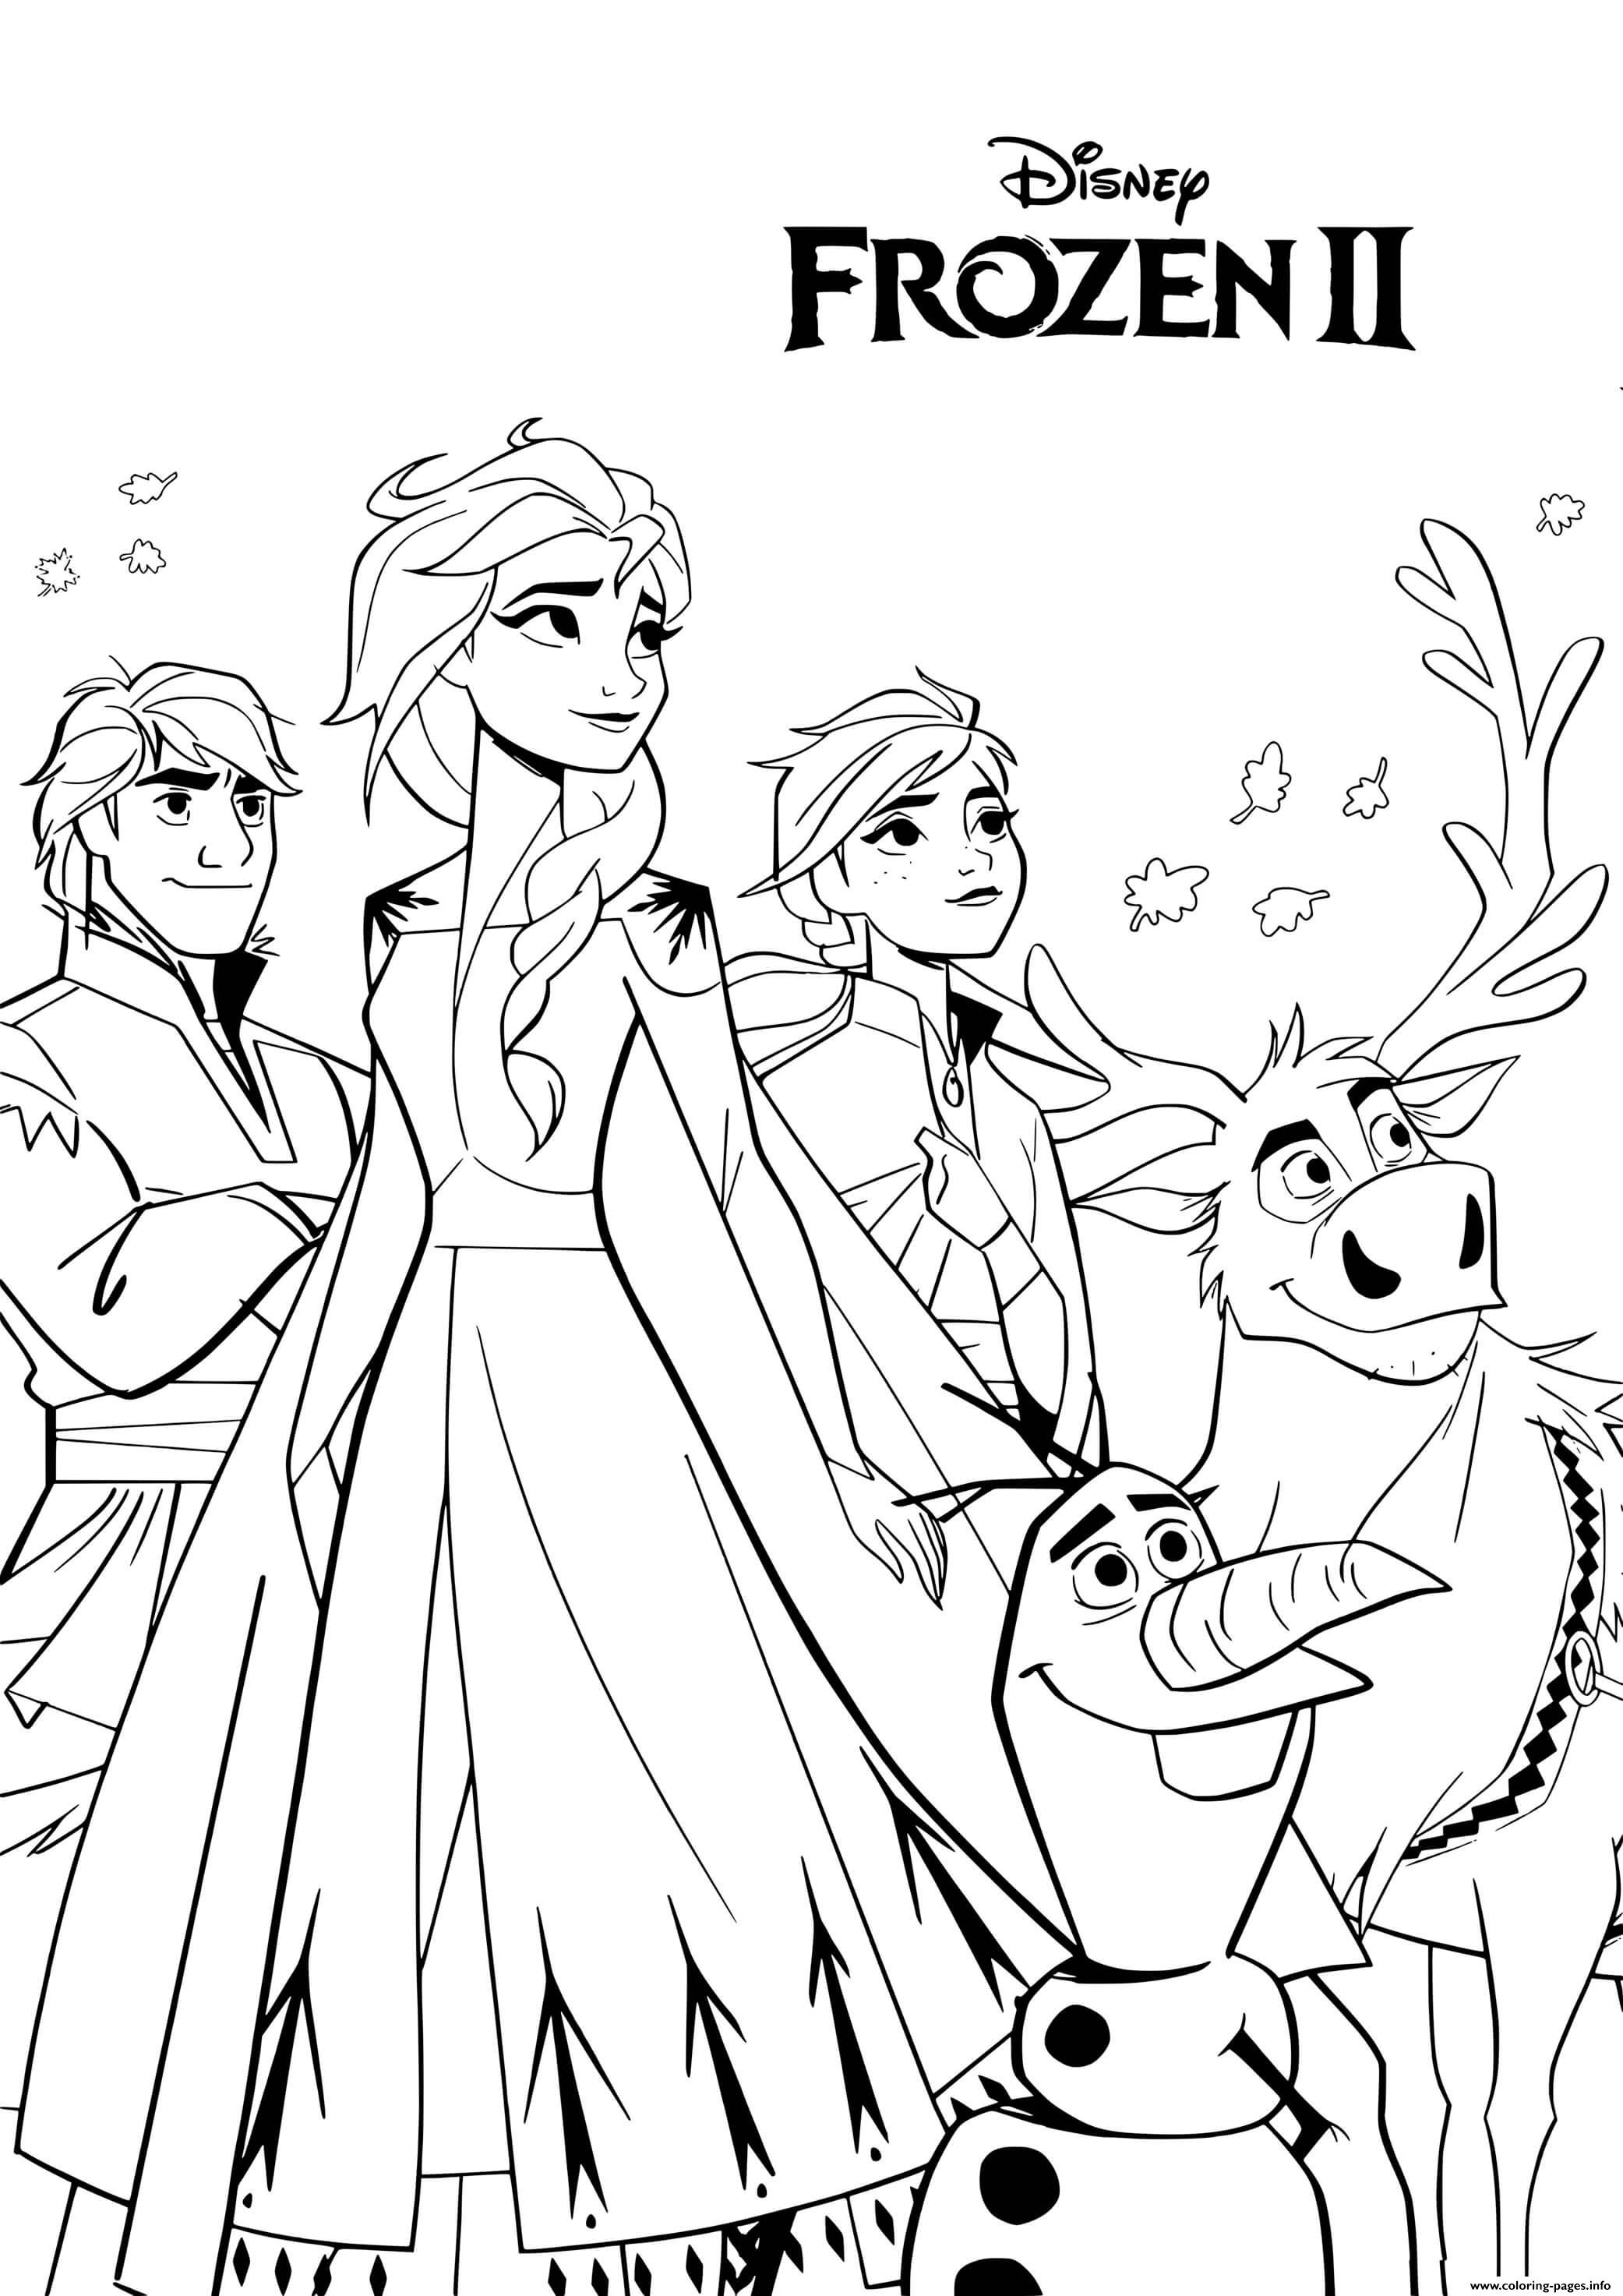 Animated Disney Movie Frozen 2 Coloring page Printable